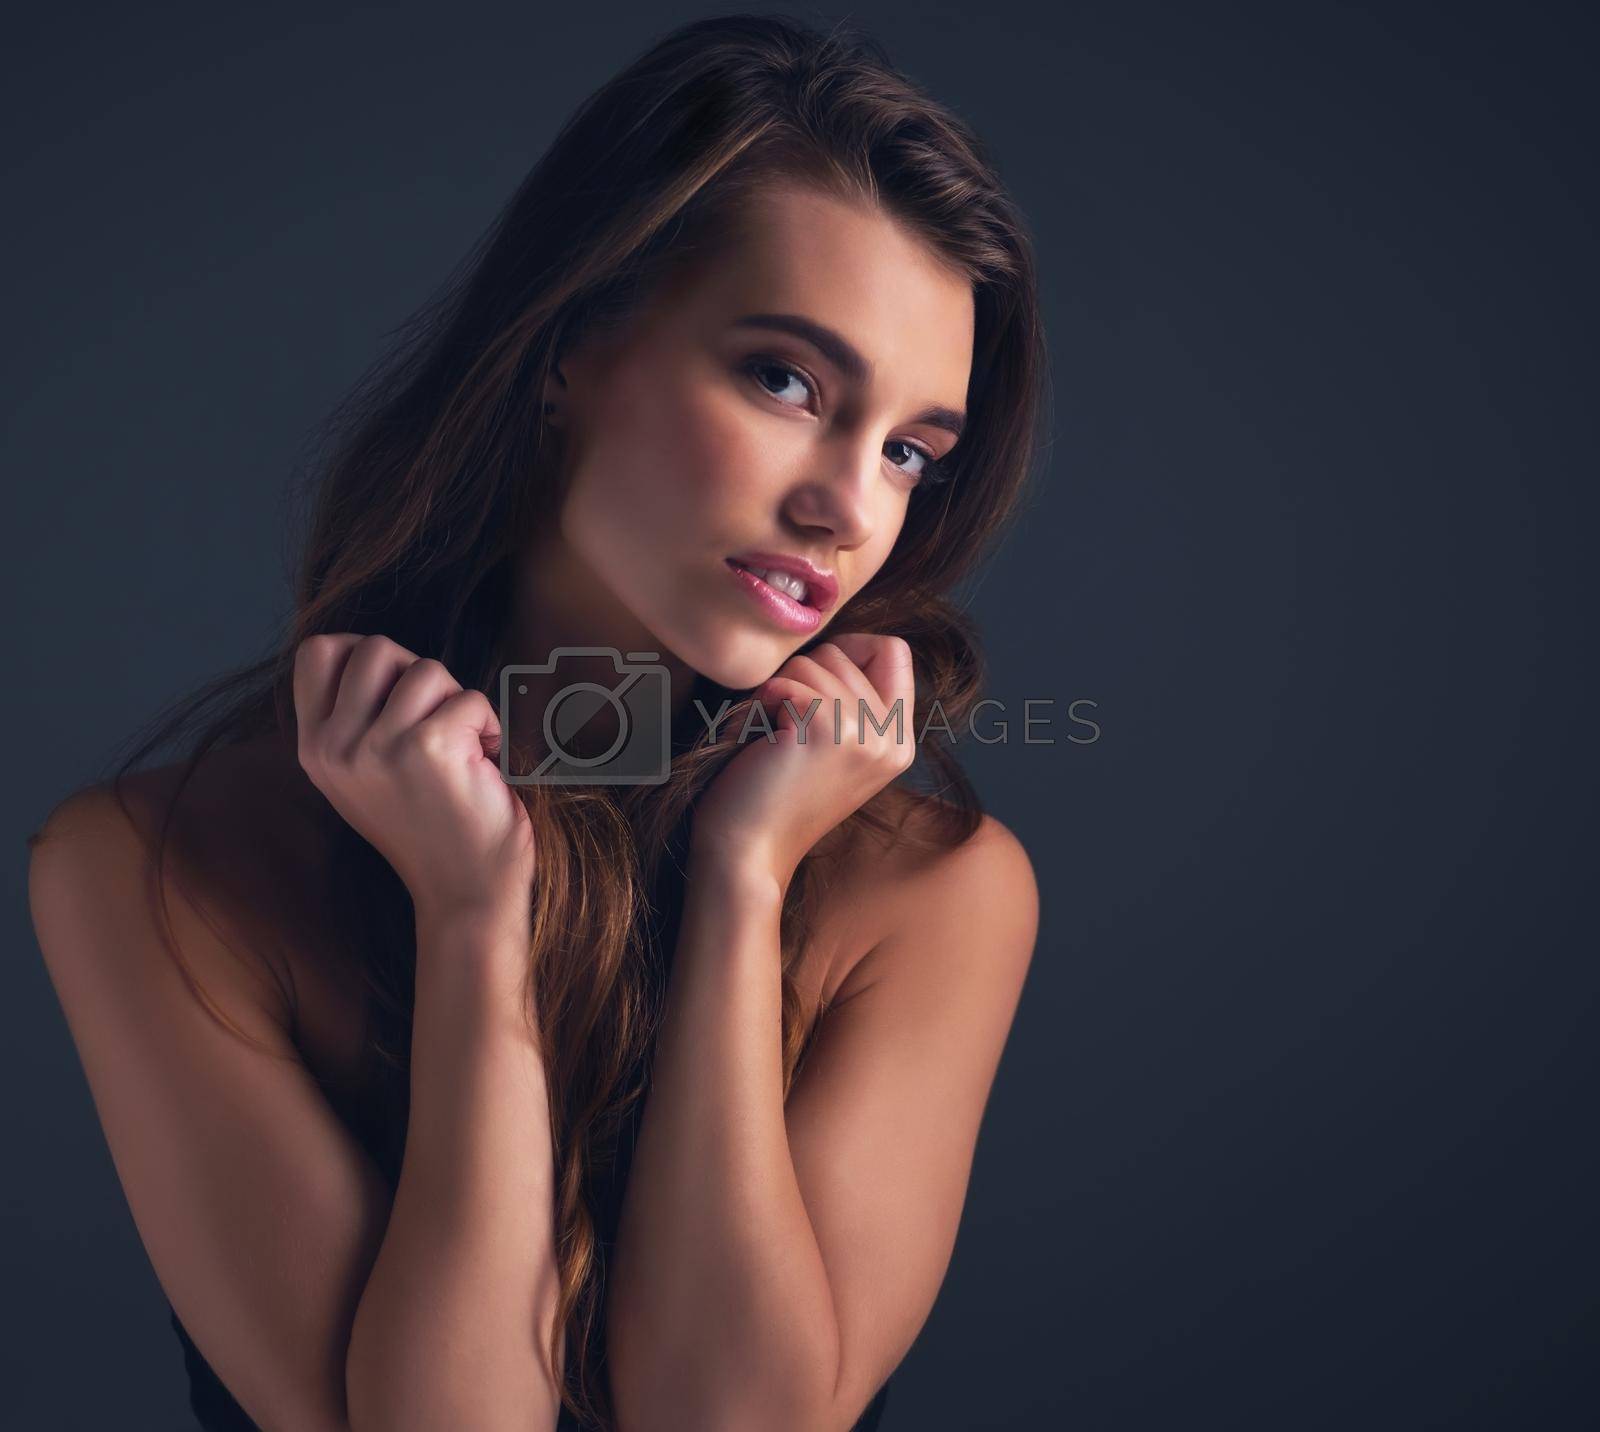 Royalty free image of There is innocence in her beauty. Studio shot of an attractive young woman posing against a dark background. by YuriArcurs